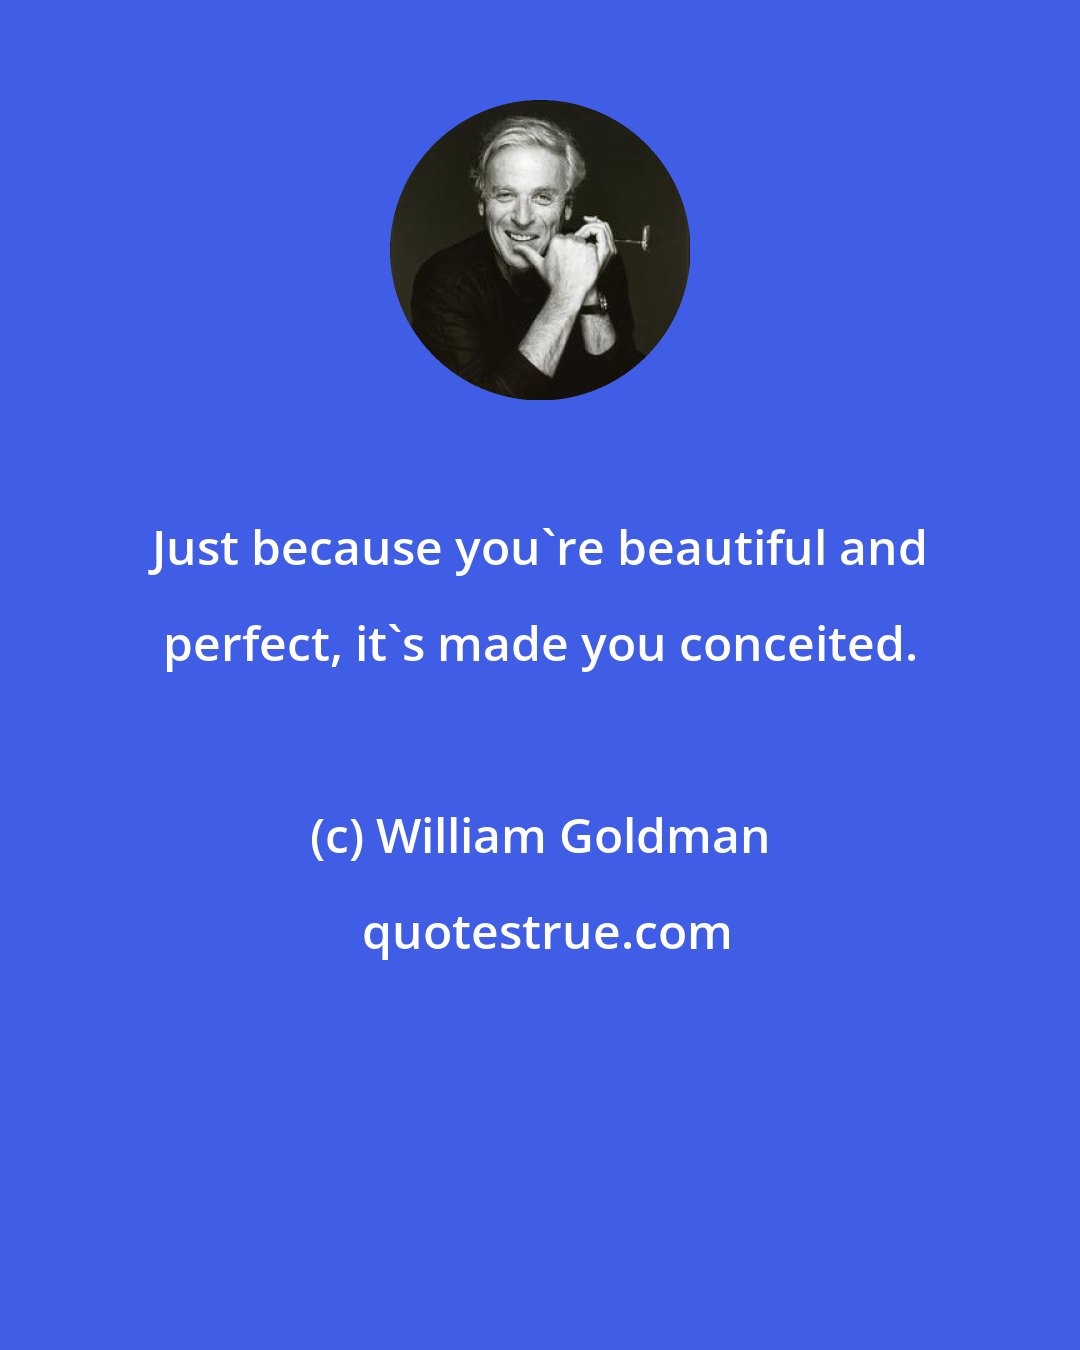 William Goldman: Just because you're beautiful and perfect, it's made you conceited.